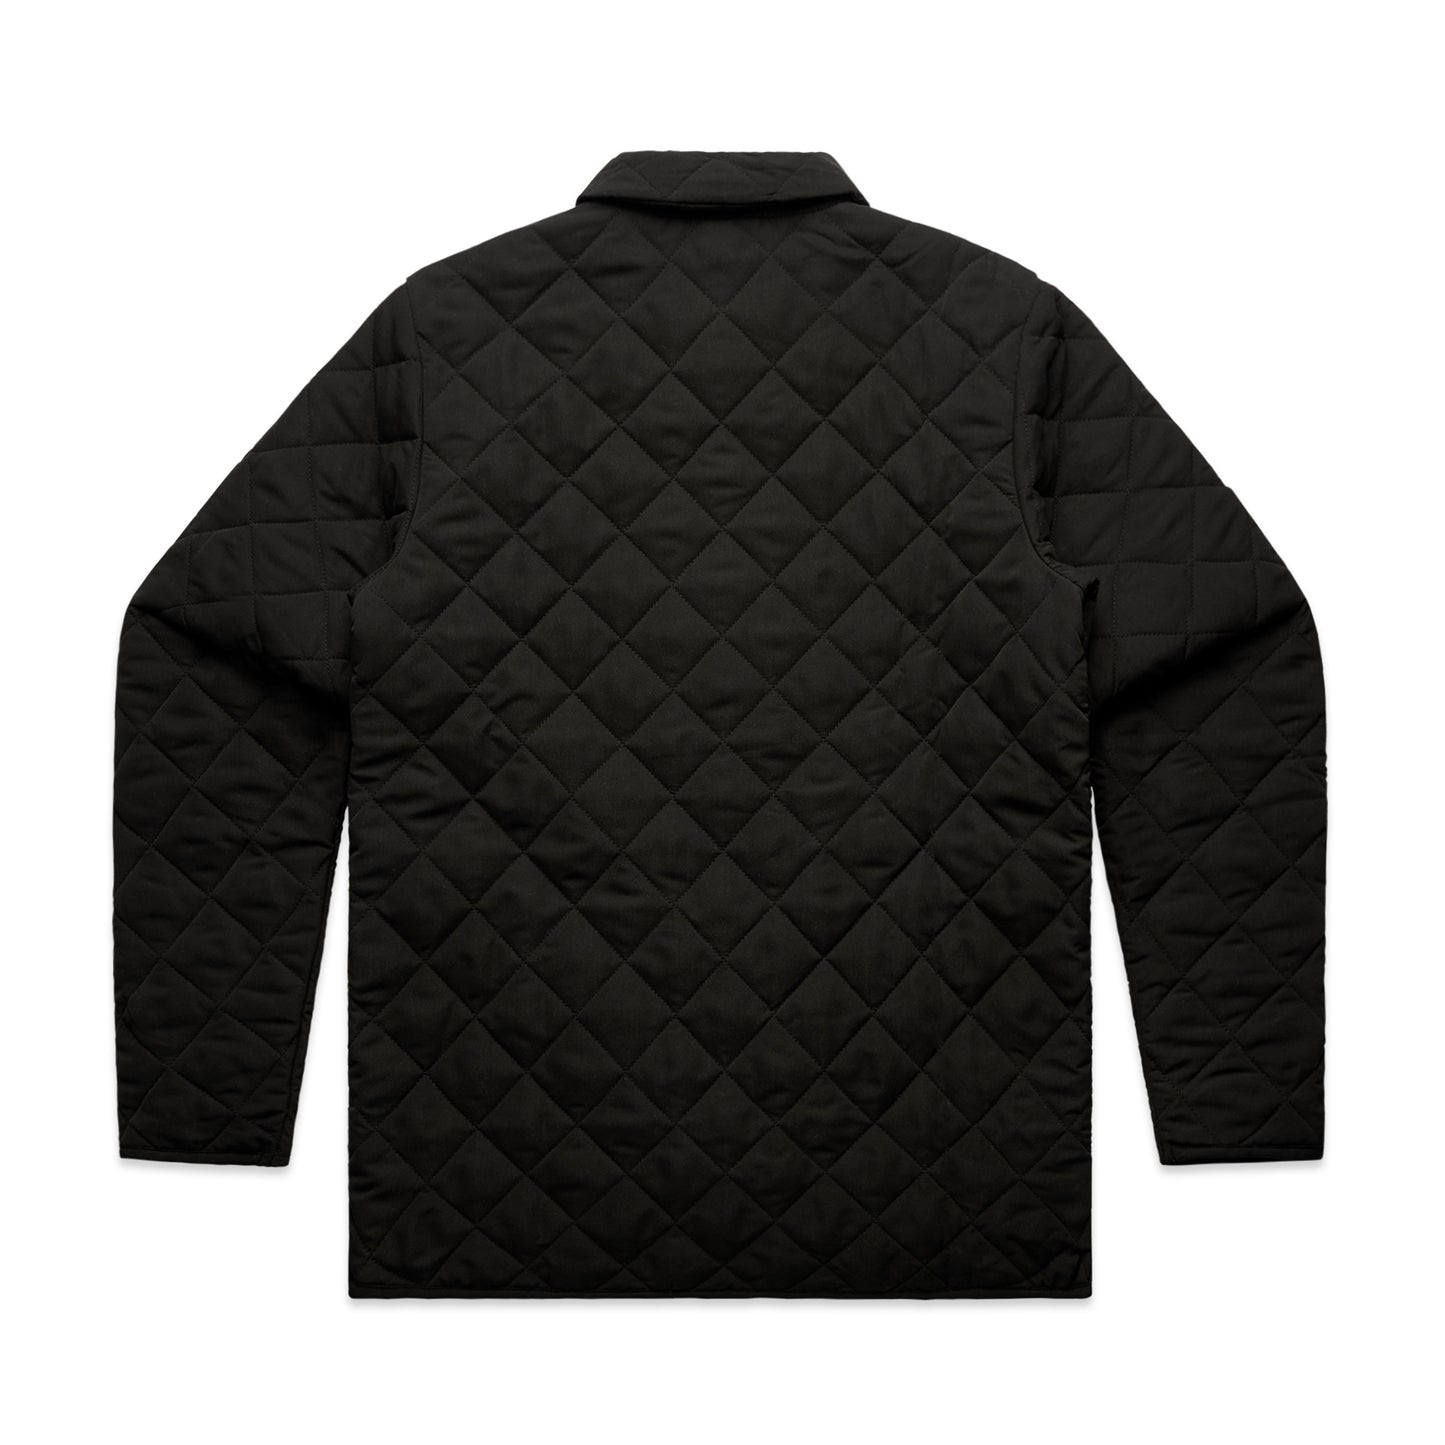 MENS QUILTED JACKET - 5525